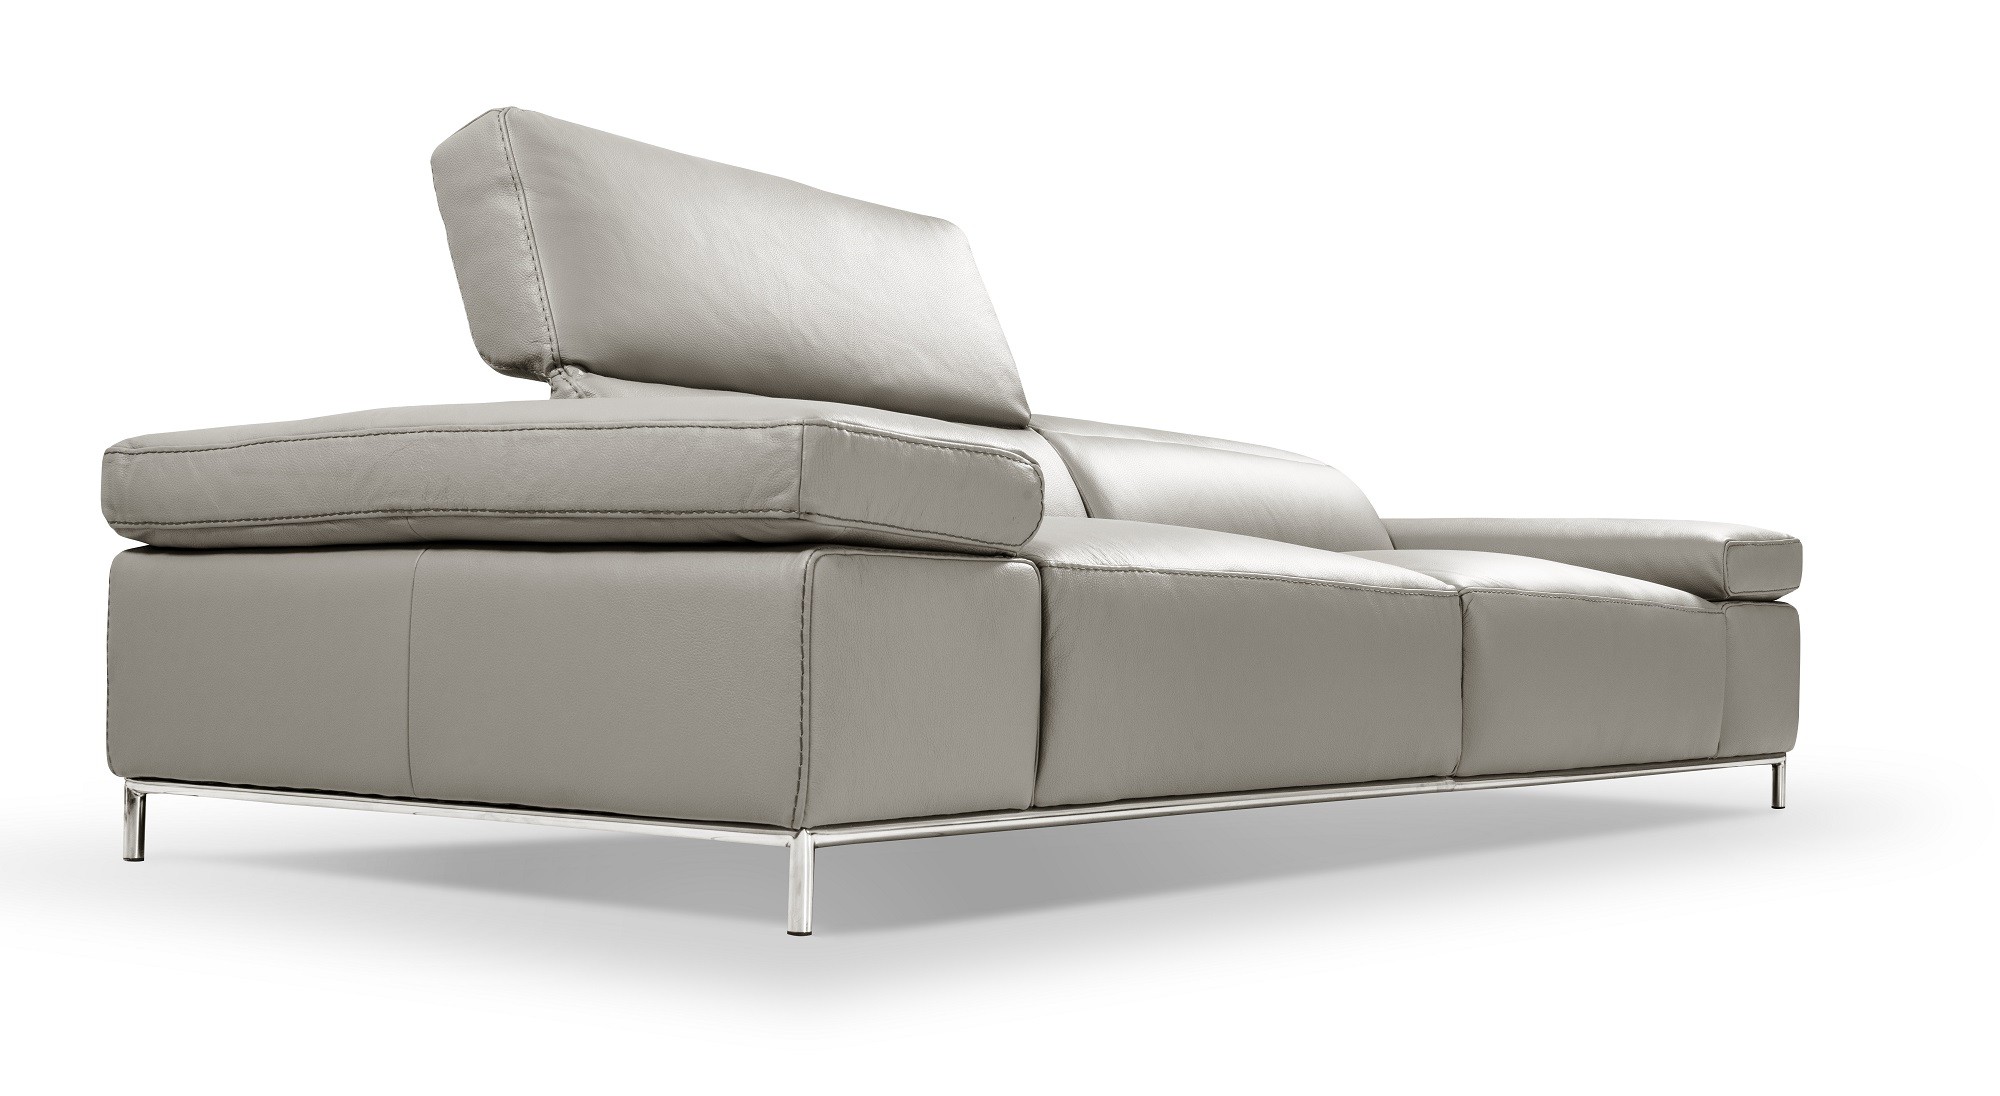 Luxury Furniture Italian Leather Upholstery - Click Image to Close